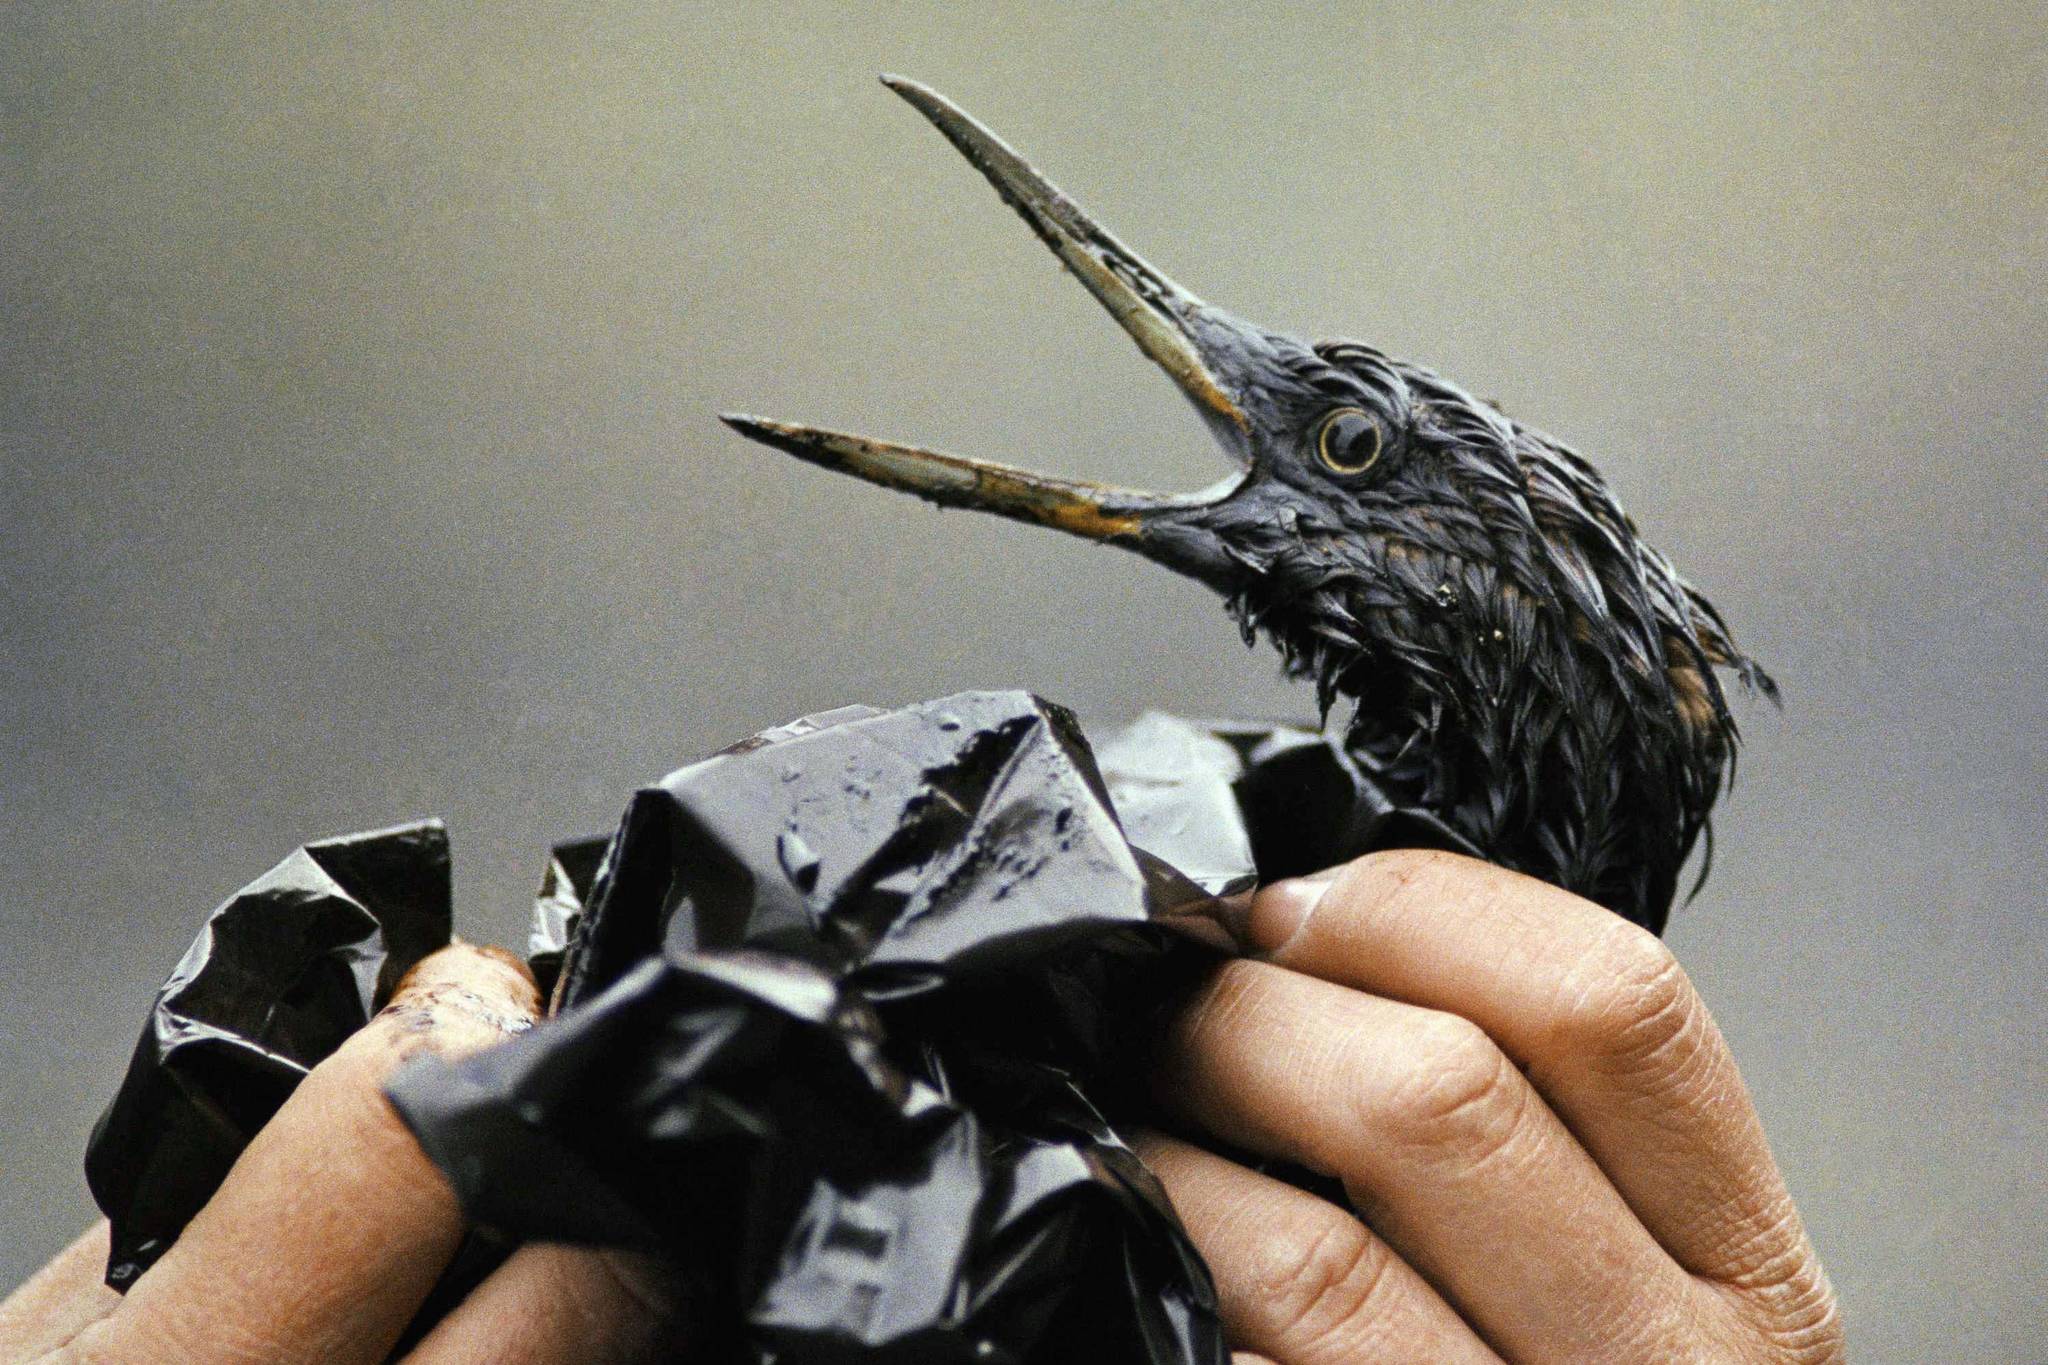 In this April 1989, file photo, an oil covered bird is examined on an island in Prince William Sound, Alaska, after the Exxon Valdez spill. Thirty years after the supertanker Exxon Valdez hit a reef and spilled about 11 million gallons of oil in Prince William Sound, the state of Alaska is looking whether to change its requirements for oil spill prevention and response plans, a move that one conservationist says could lead to a watering down of environmental regulations. (AP Photo/Jack Smith, File)